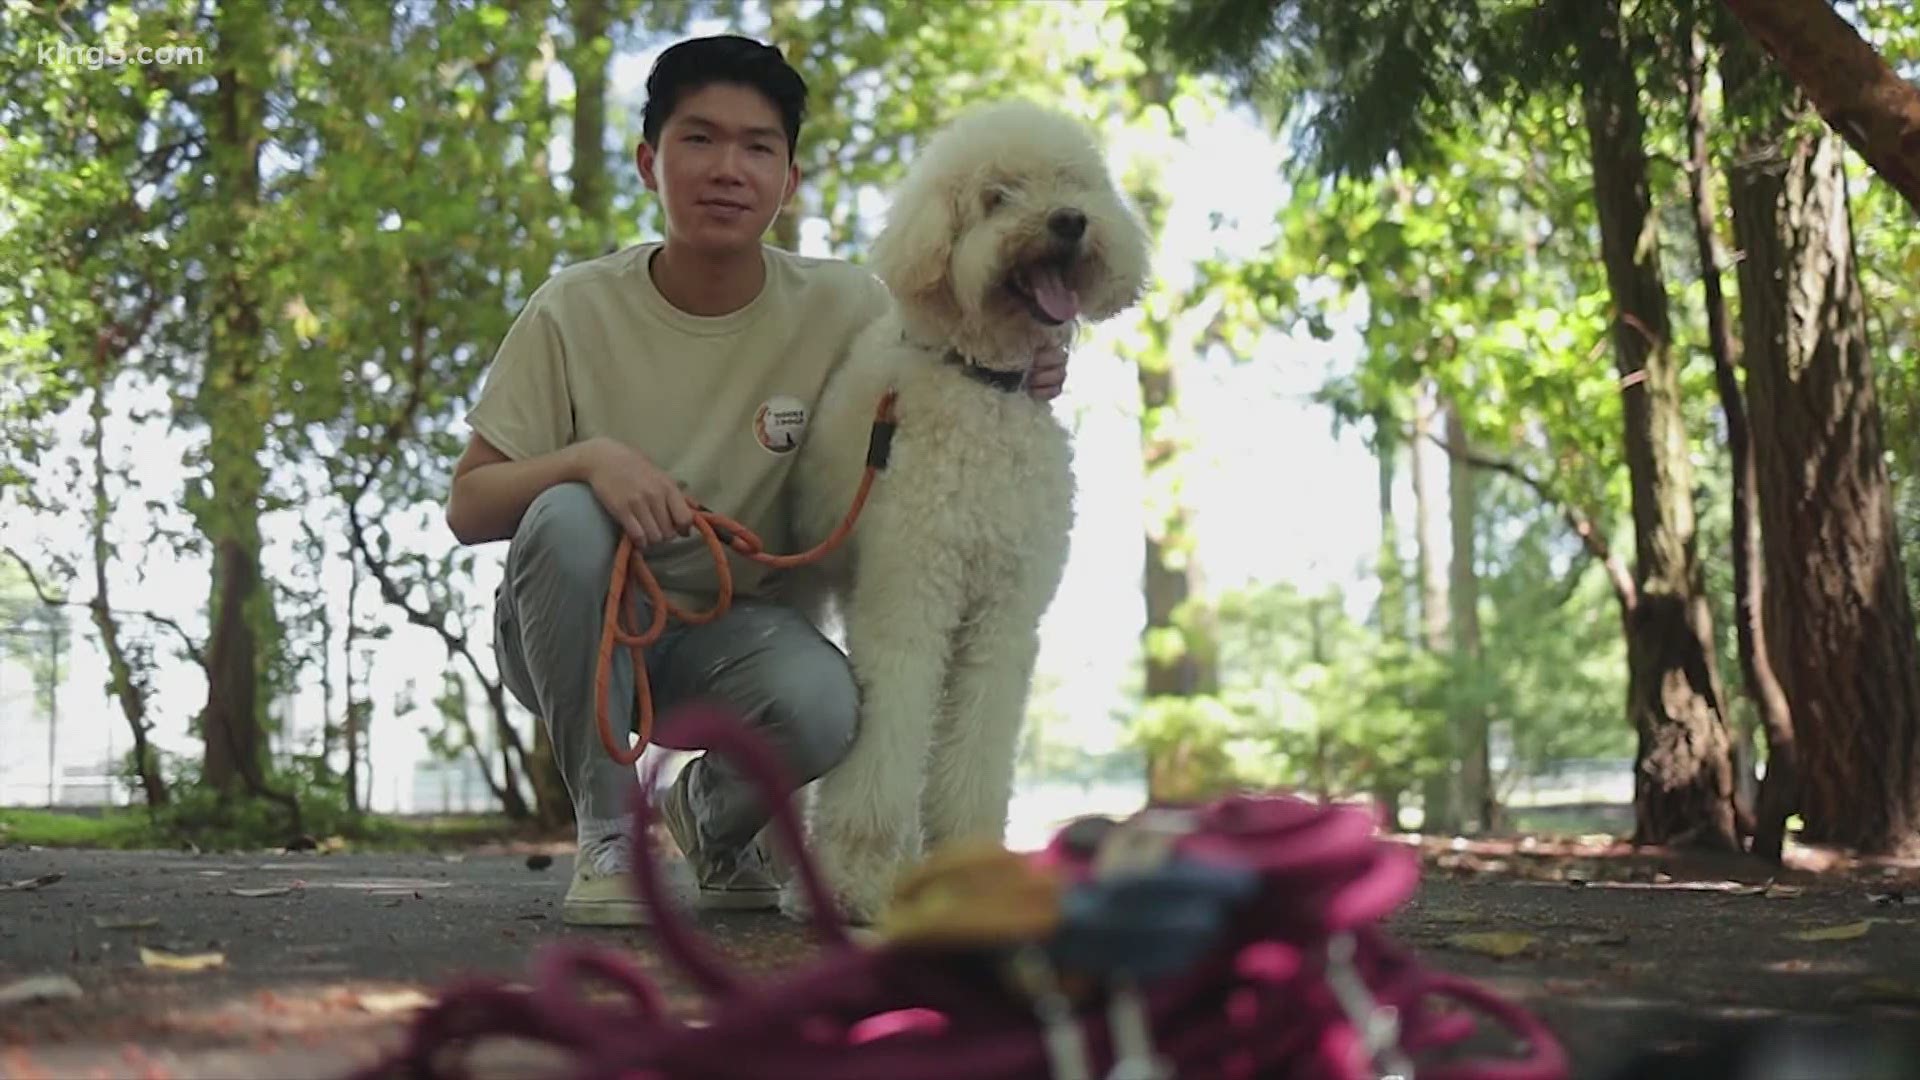 Redmond High School student using his summer to help his community during the pandemic with his nonprofit 'Rocks 2 Dogs' that recycles climbing ropes into leashes.